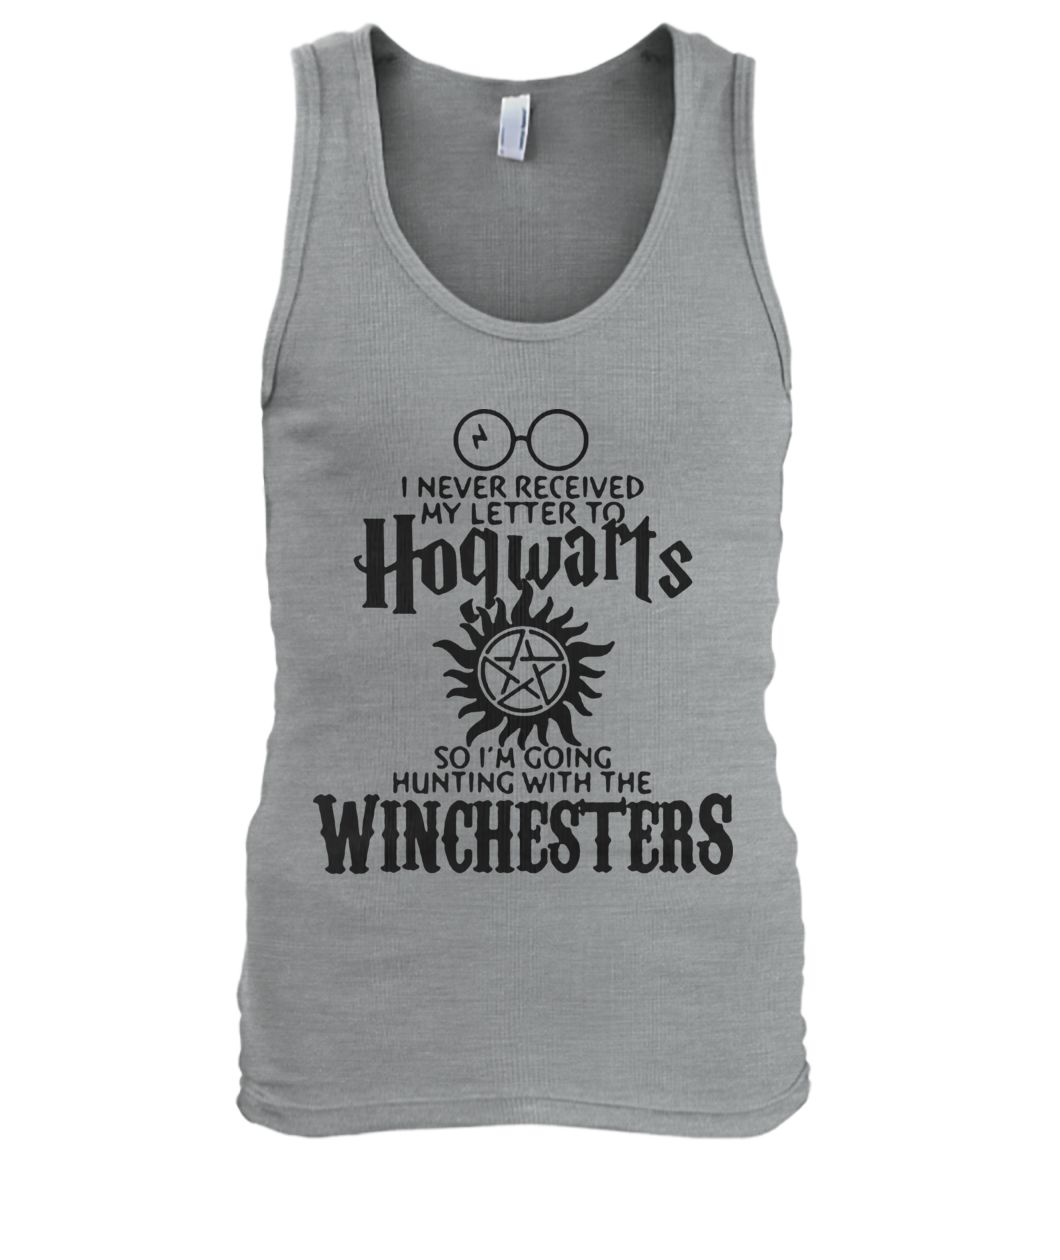 I never received my letter to hogwarts so im going hunting with the winchesters men's tank top